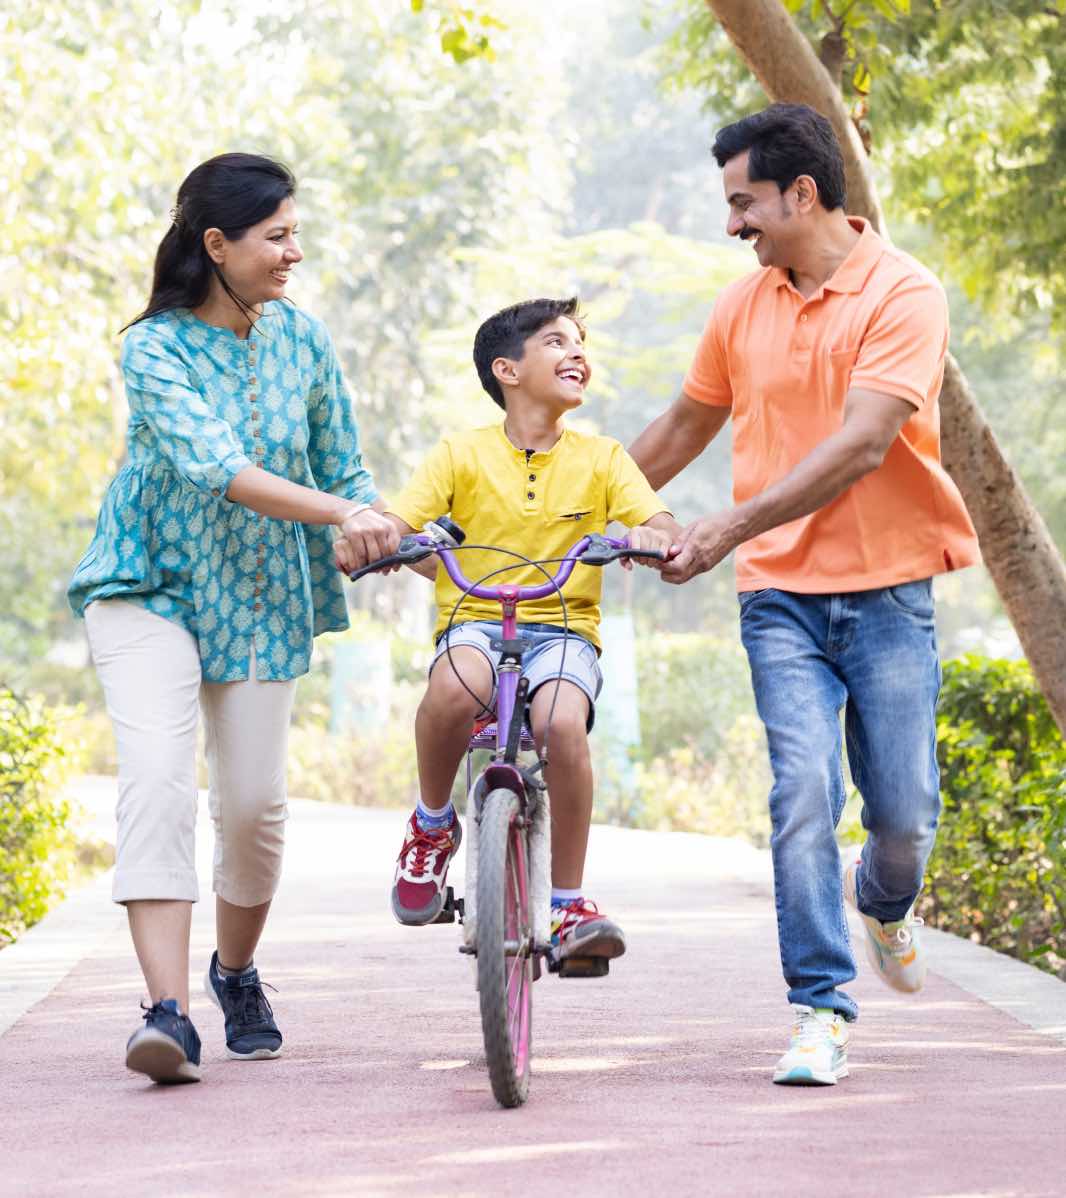 Parents smiling and helping their child to ride a bicycle